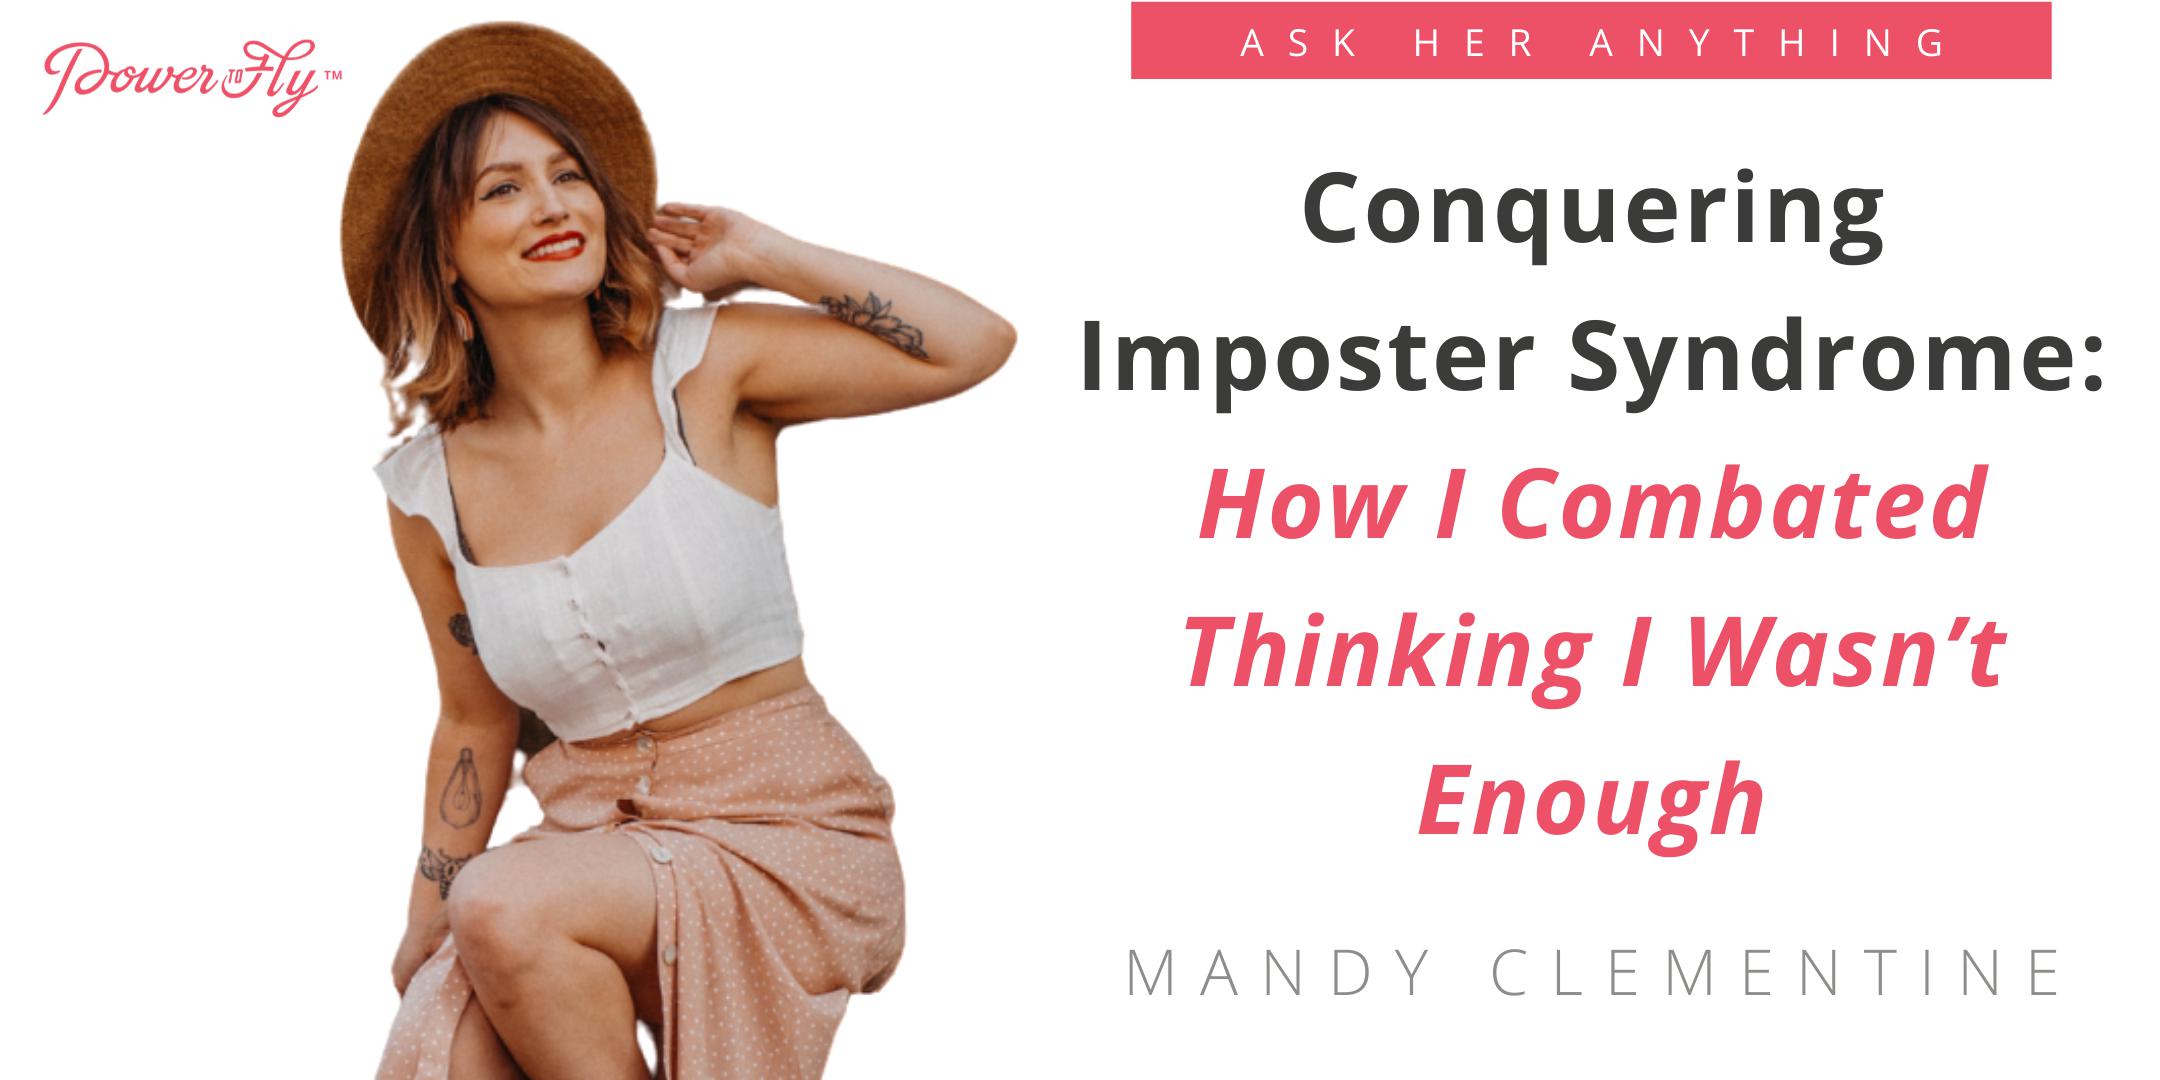 Conquering Imposter Syndrome: How I Combated Thinking I Wasn’t Enough